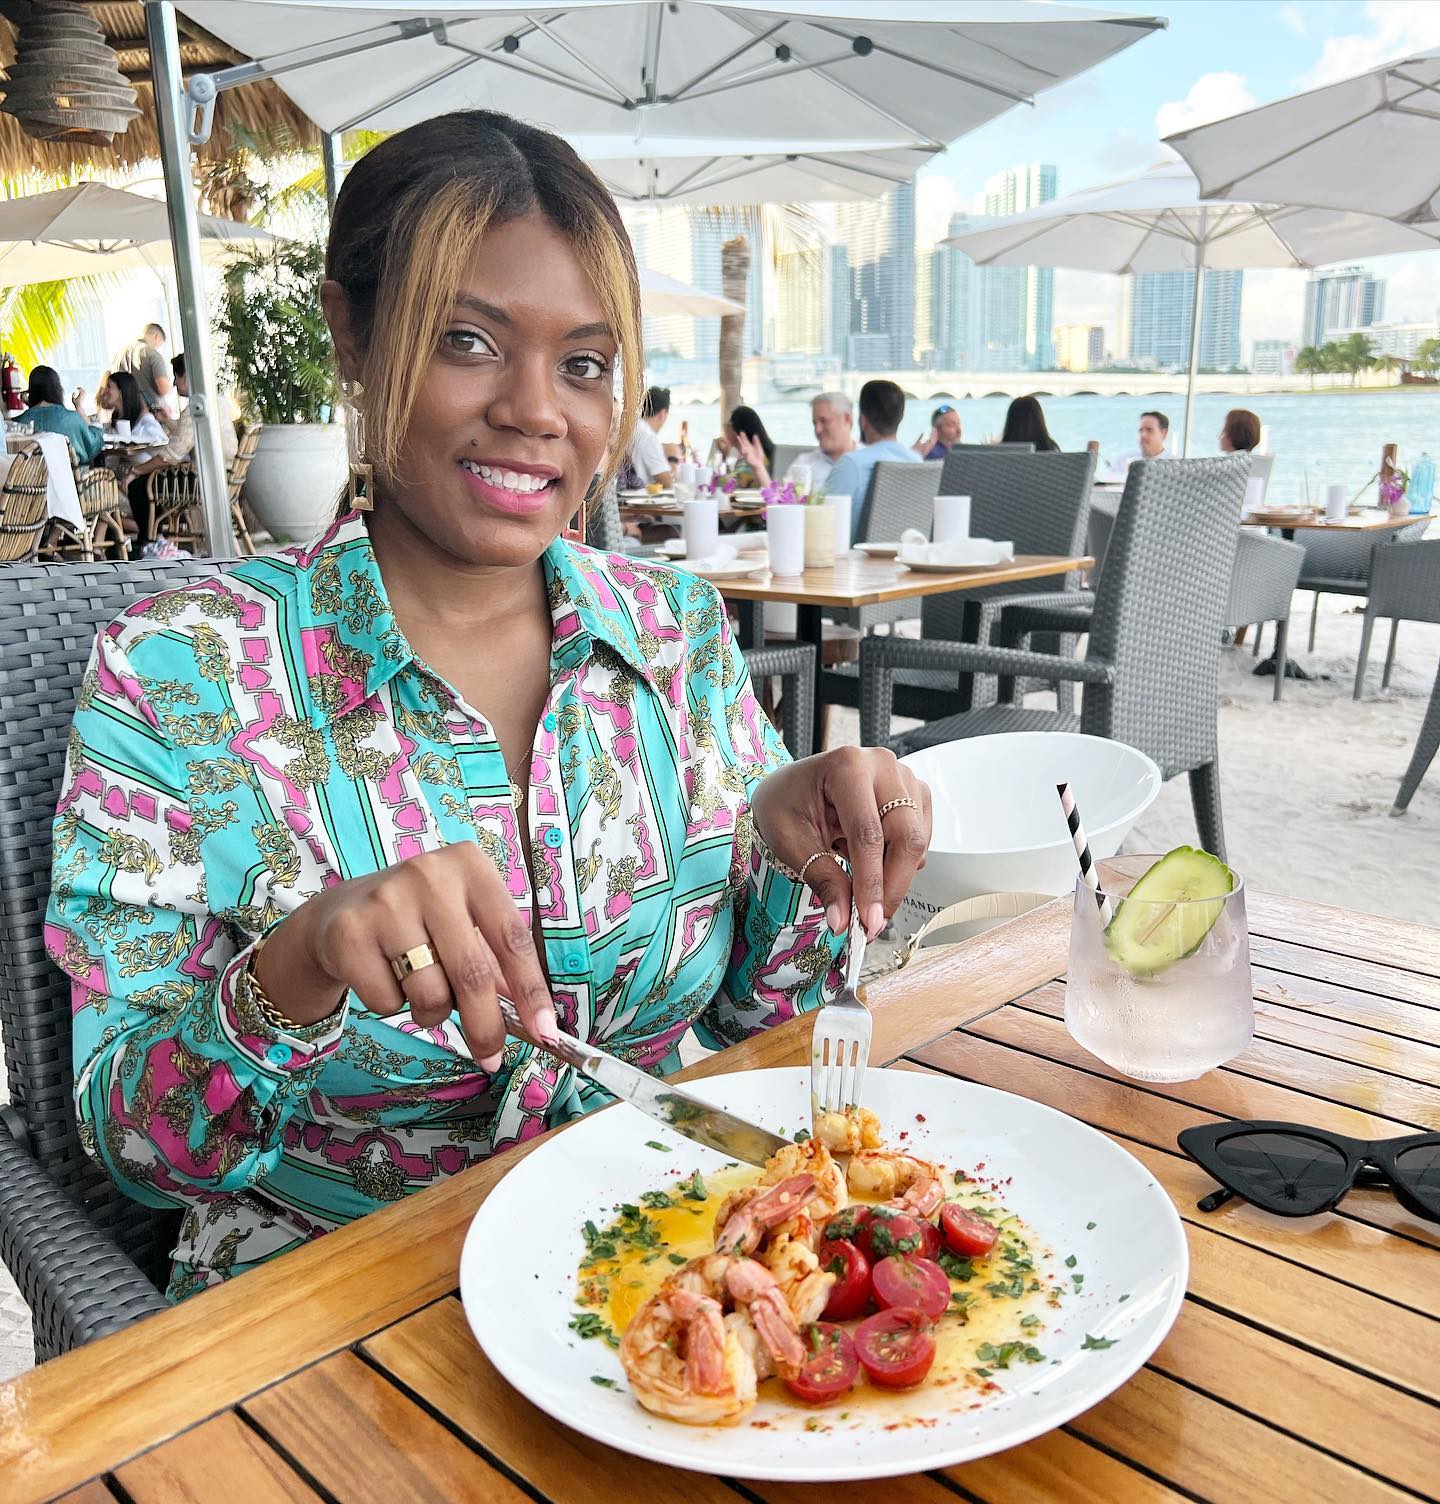 Vacation calories don’t count. And don’t let anyone tell you different 😉
°°°
#vacationfood #foodblogger #december #foodie #vitamind #joiabeachmiami #travelfoodie #travelfoodblog #dcfoodblogger #travelfoodies #girlswhoblog #womenfoodies #womenblogger #blackfoodie #blackfoodbloggers #brickellmiami #lunchonthebeach #vacationvibes #vacationcaloriesdontcount #beachvibes